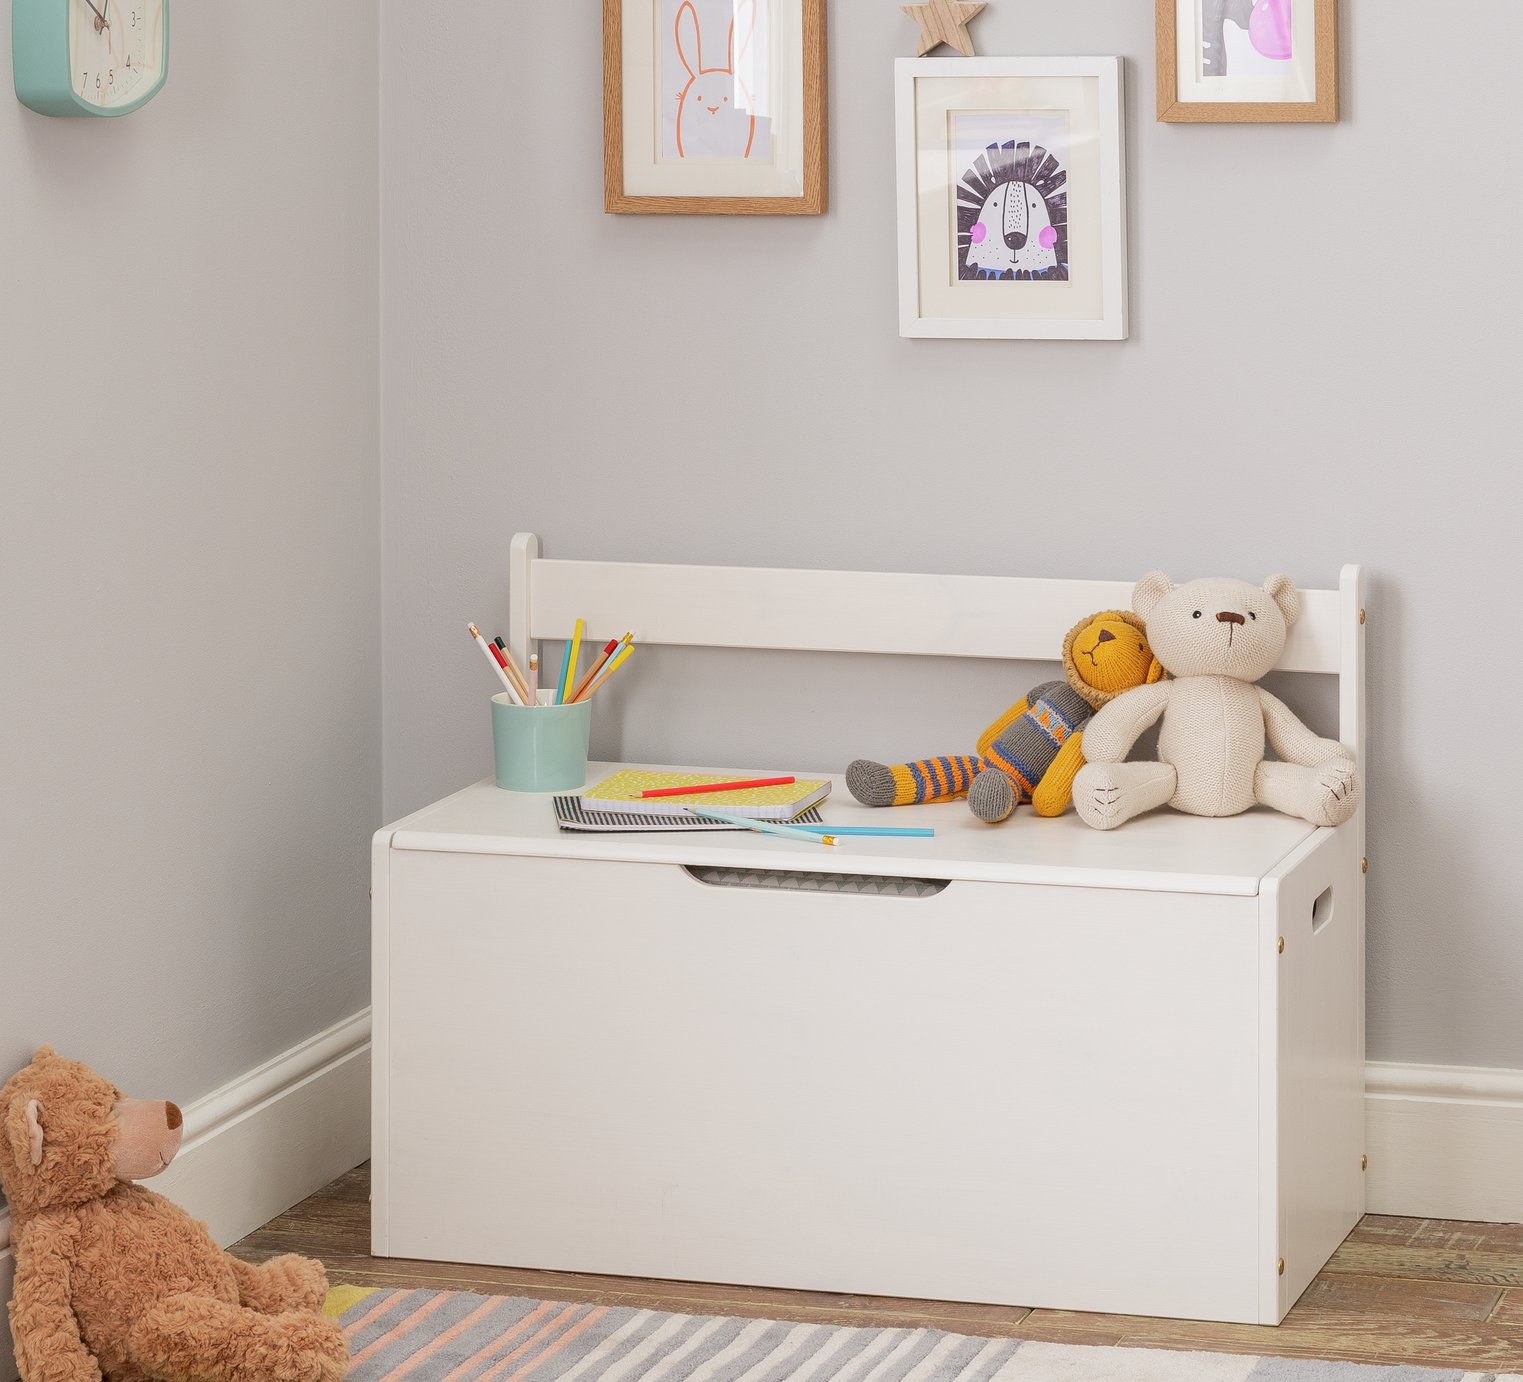 large toy box for boys